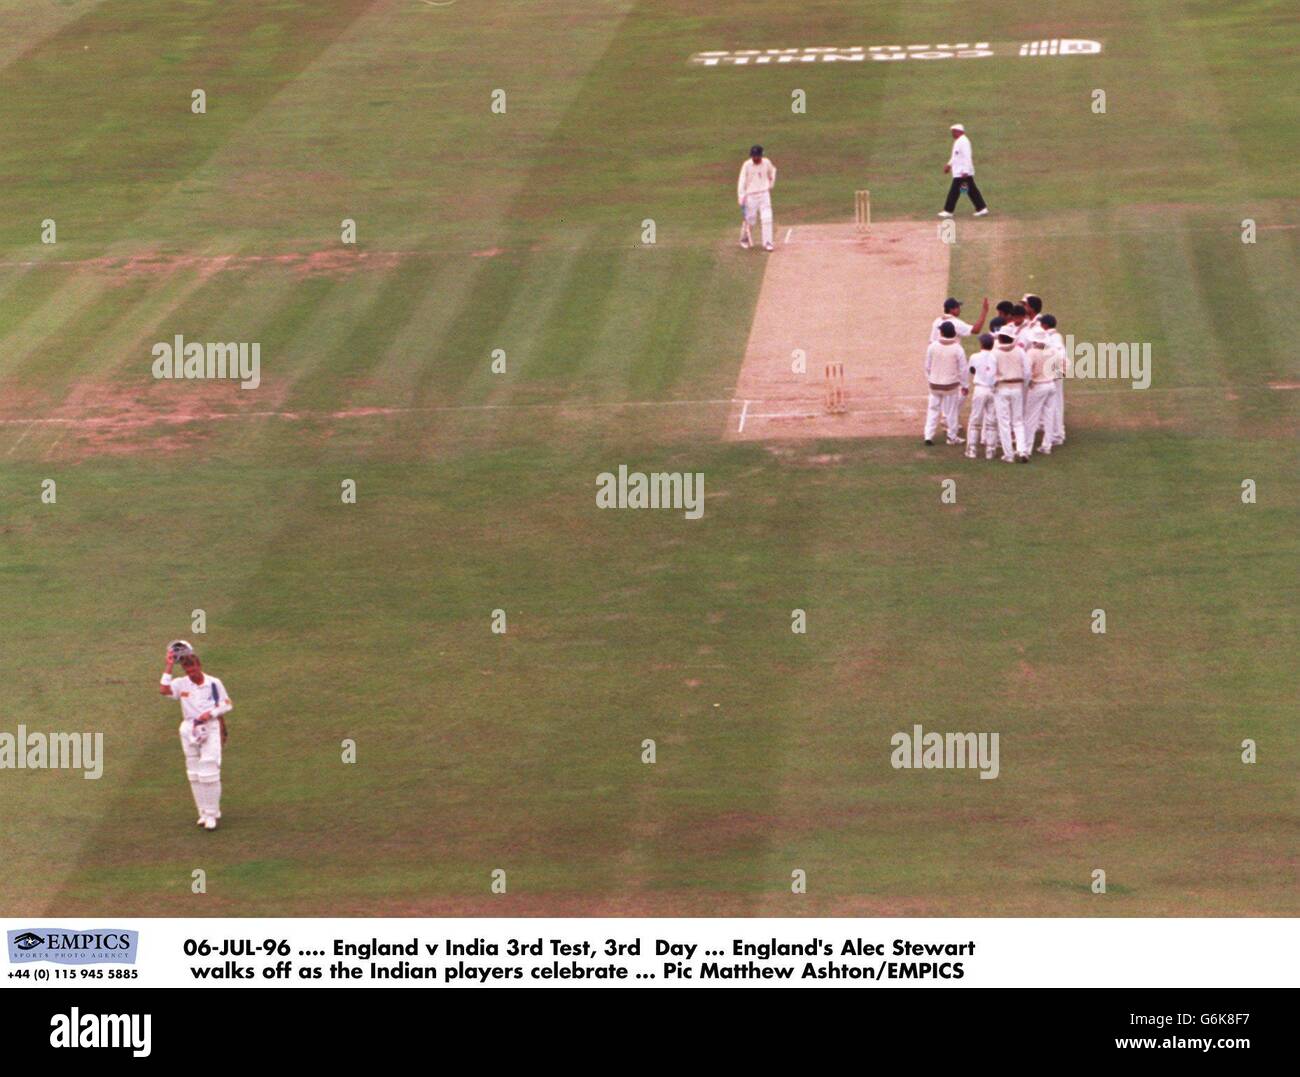 06-JUL-96. England v India 3rd Test, 3rd Day. England's Alec Stewart walks off as the Indian players celebrate Stock Photo